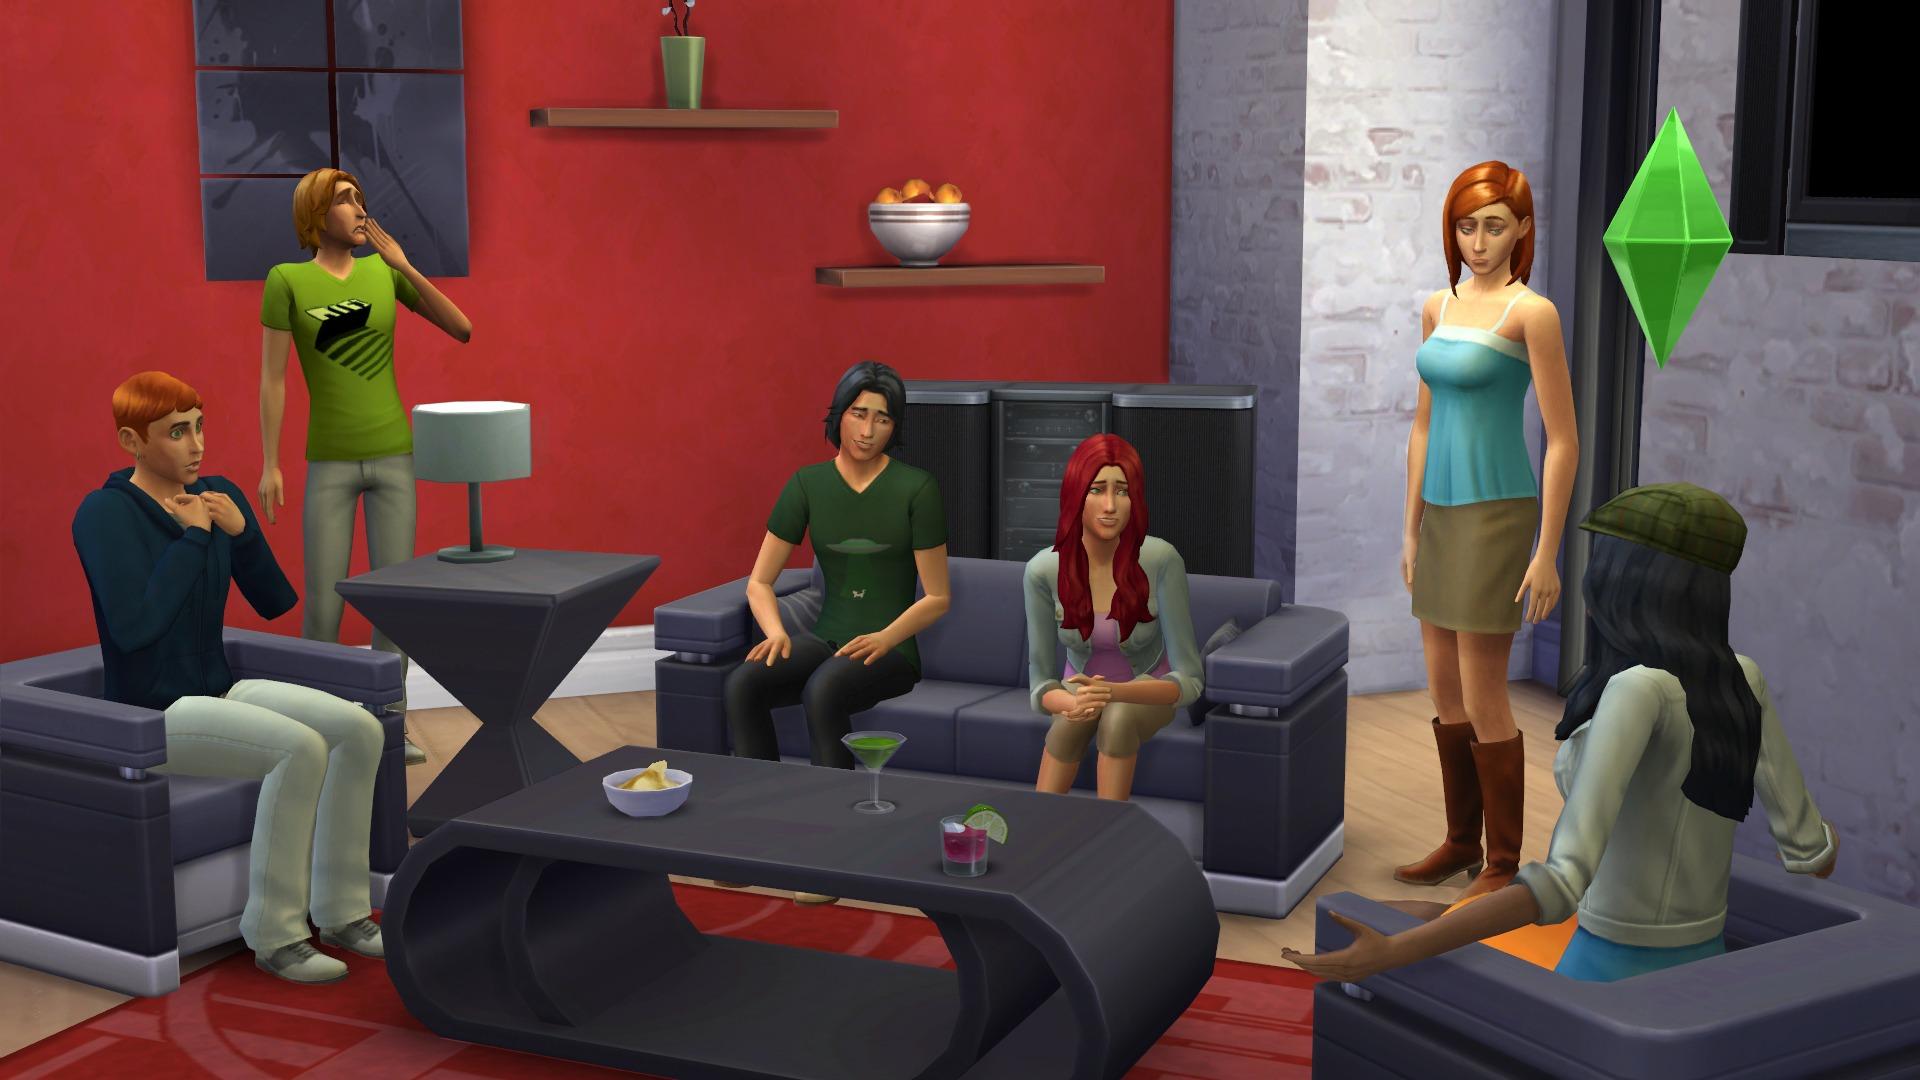 The Sims 4 Party